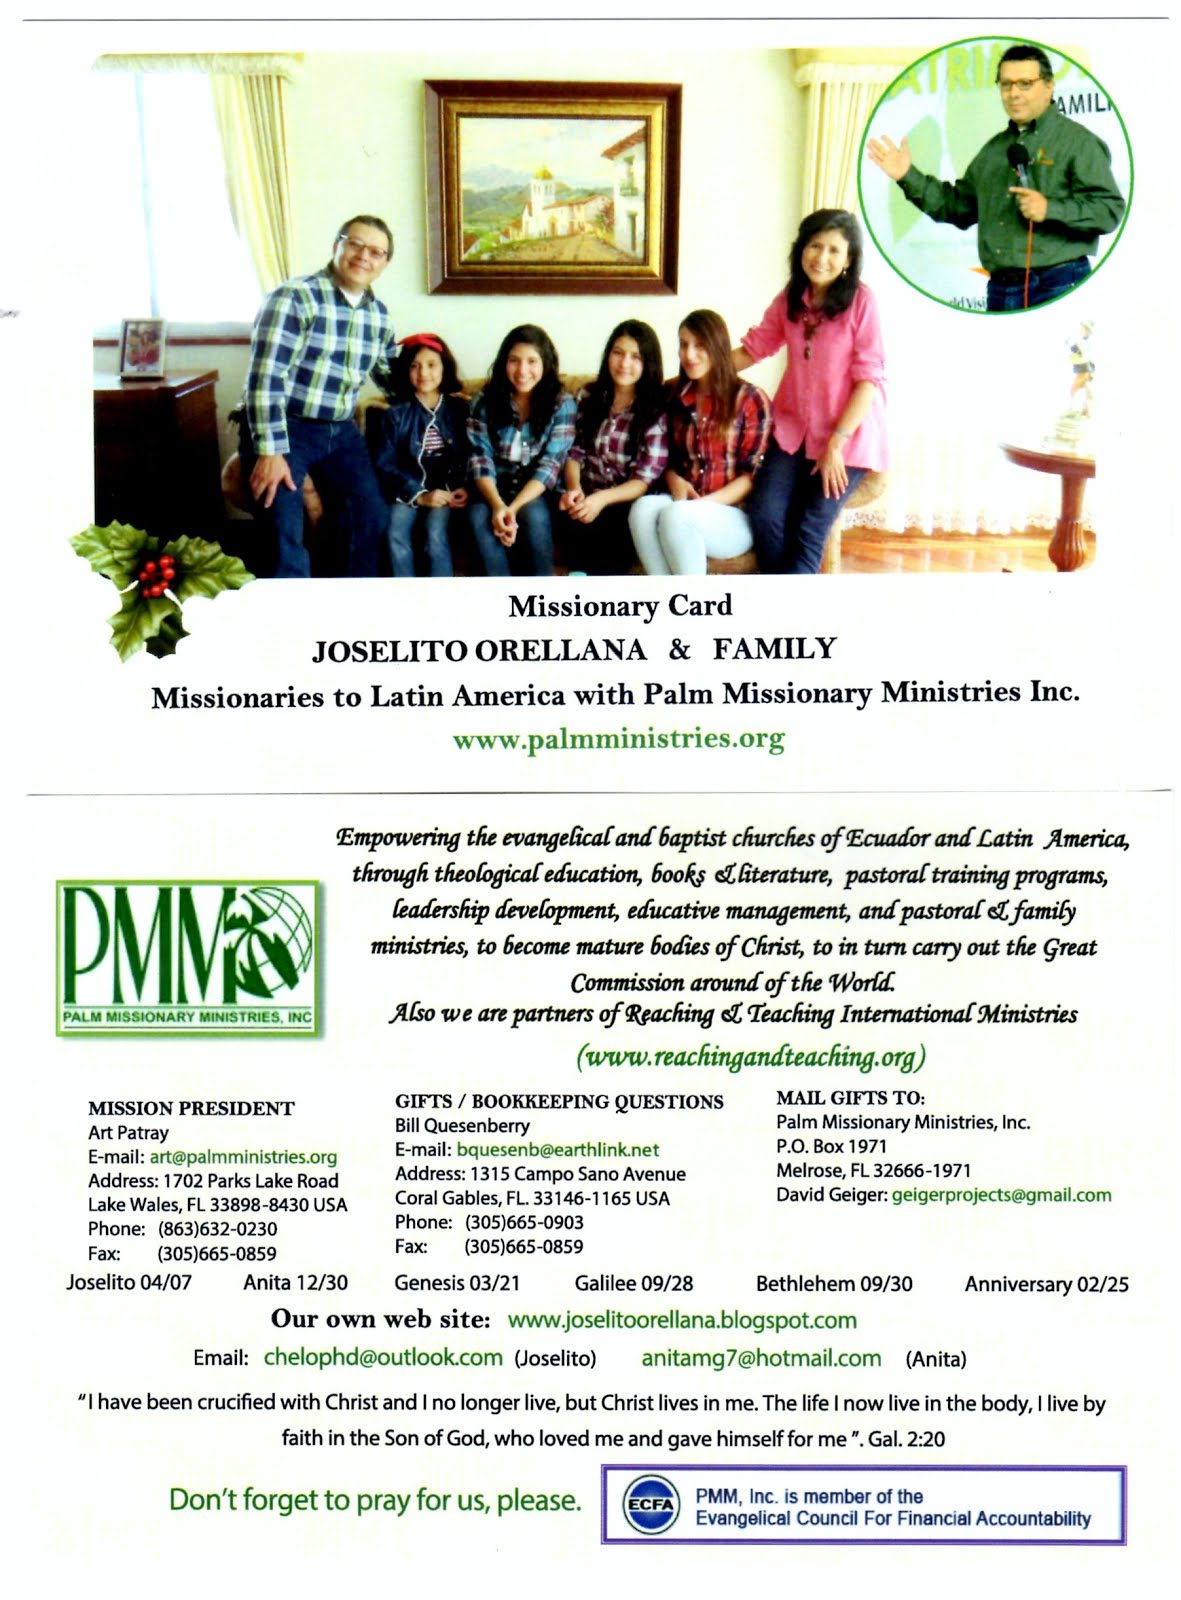 Our Missionary Card, PMM Inc., USA